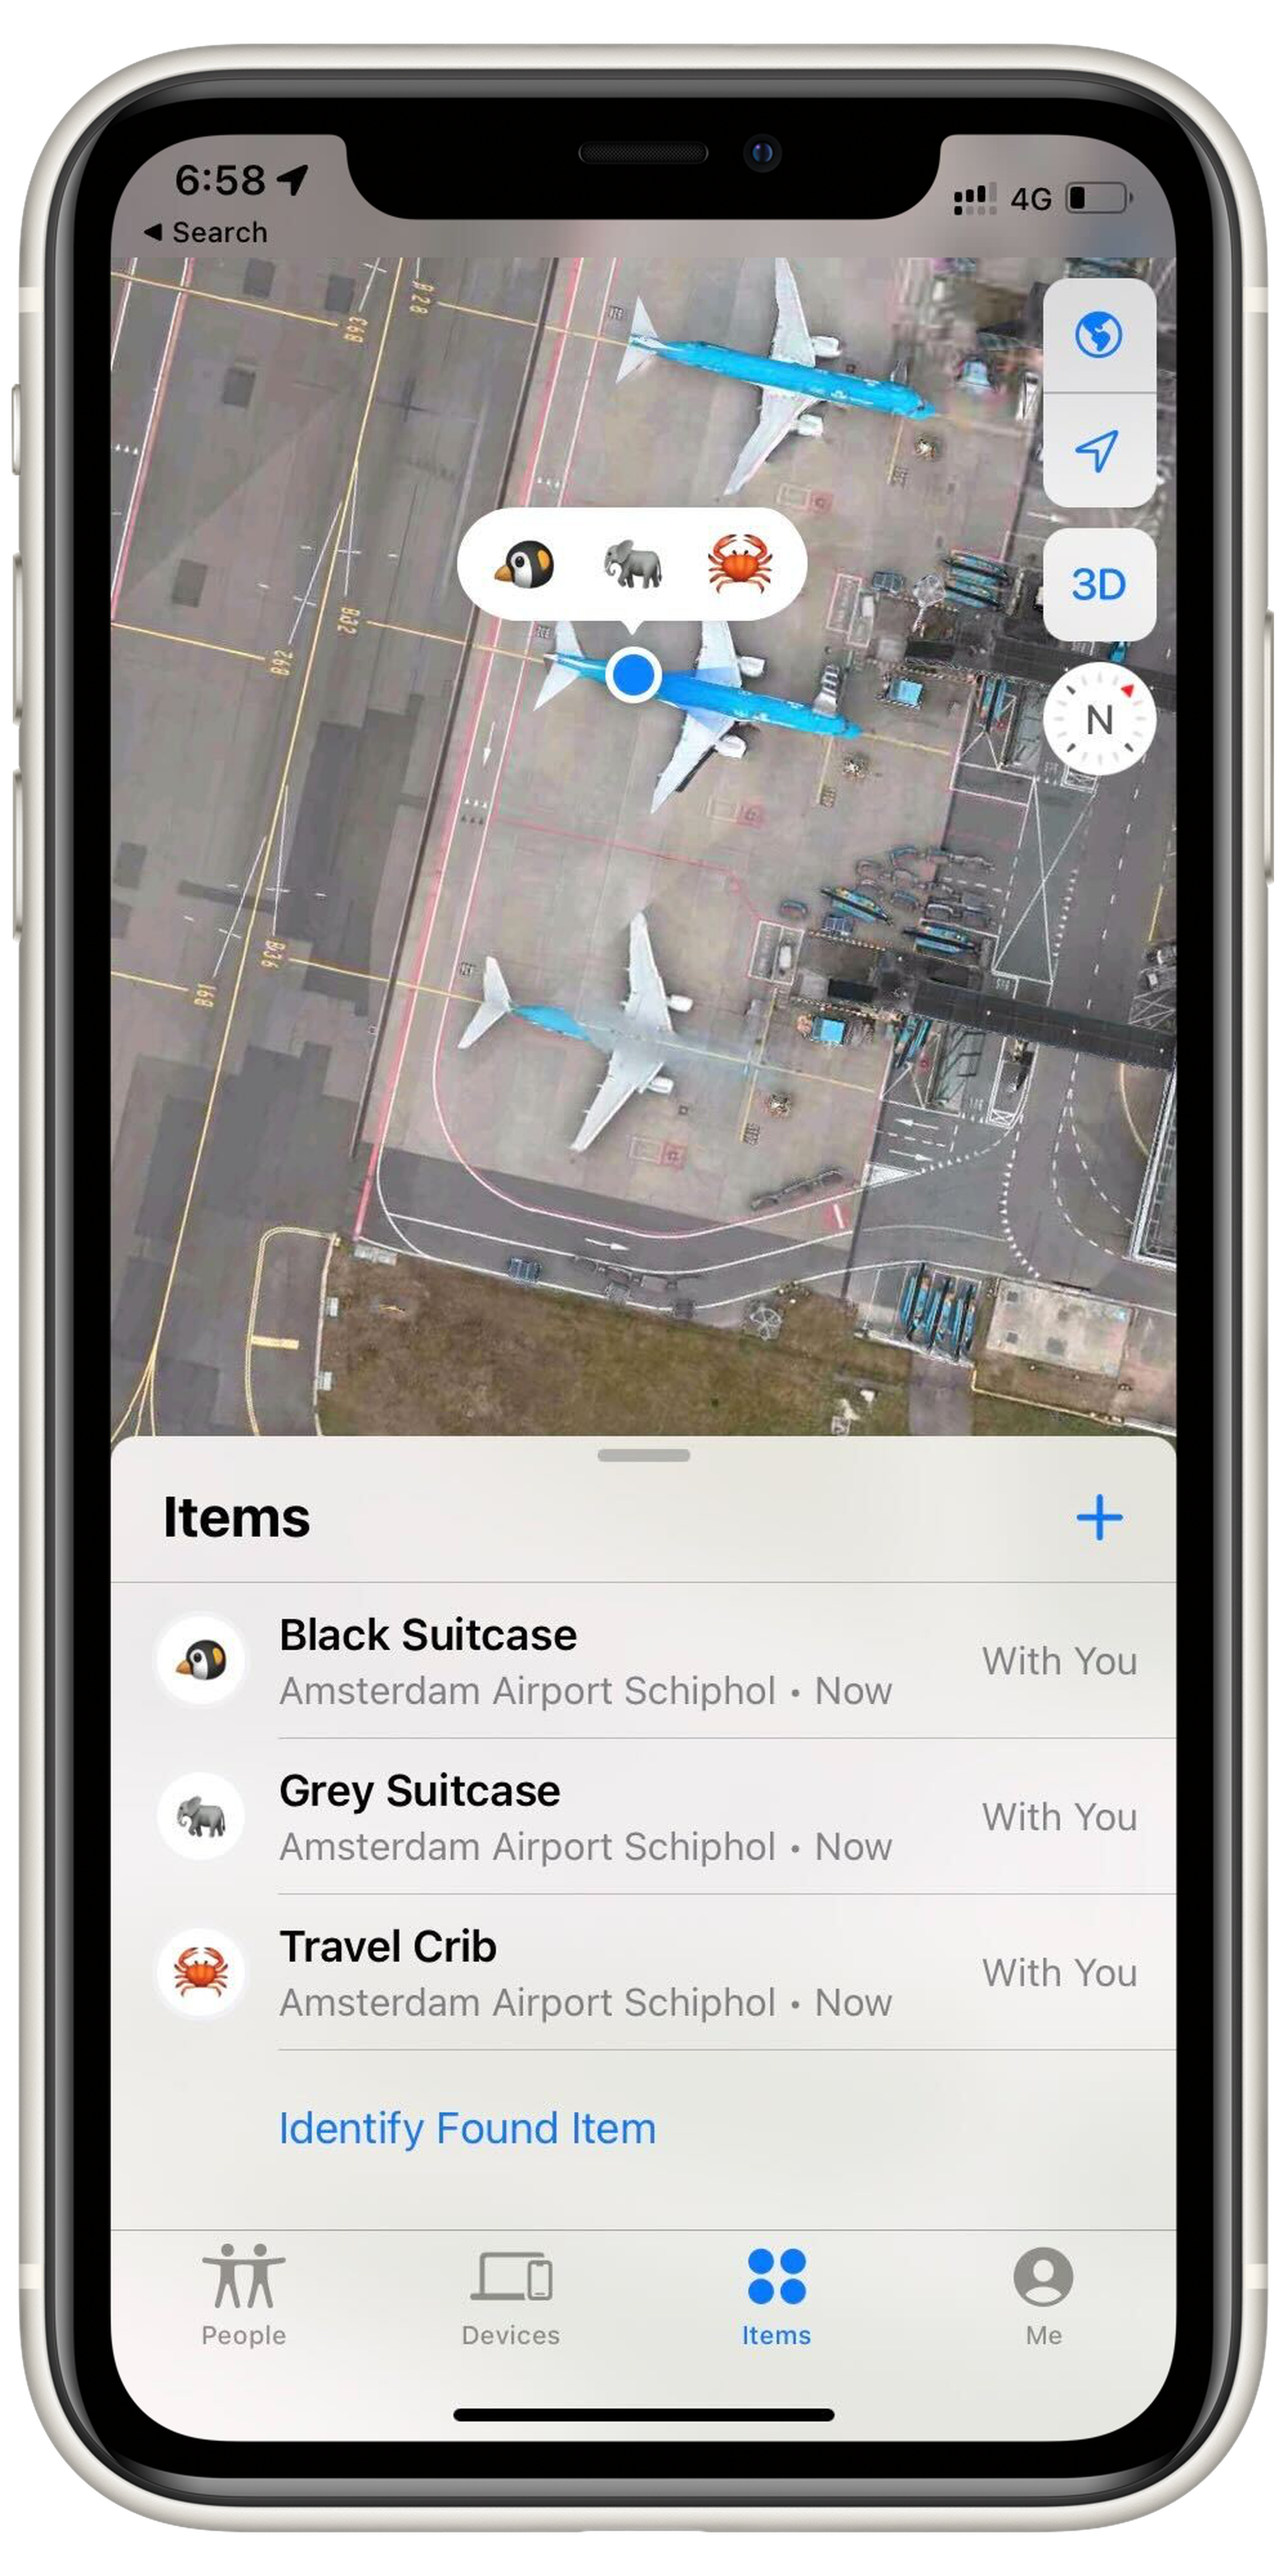 A screenshot of the Items tab in Apple’s Find My app. It shows three items: Black Suitcase, Grey Suitcase, and Travel Crib. Each has the location Amsterdam Airport Schiphol, and the location dot for each is superimposed on a satellite image of a plane at the airport.